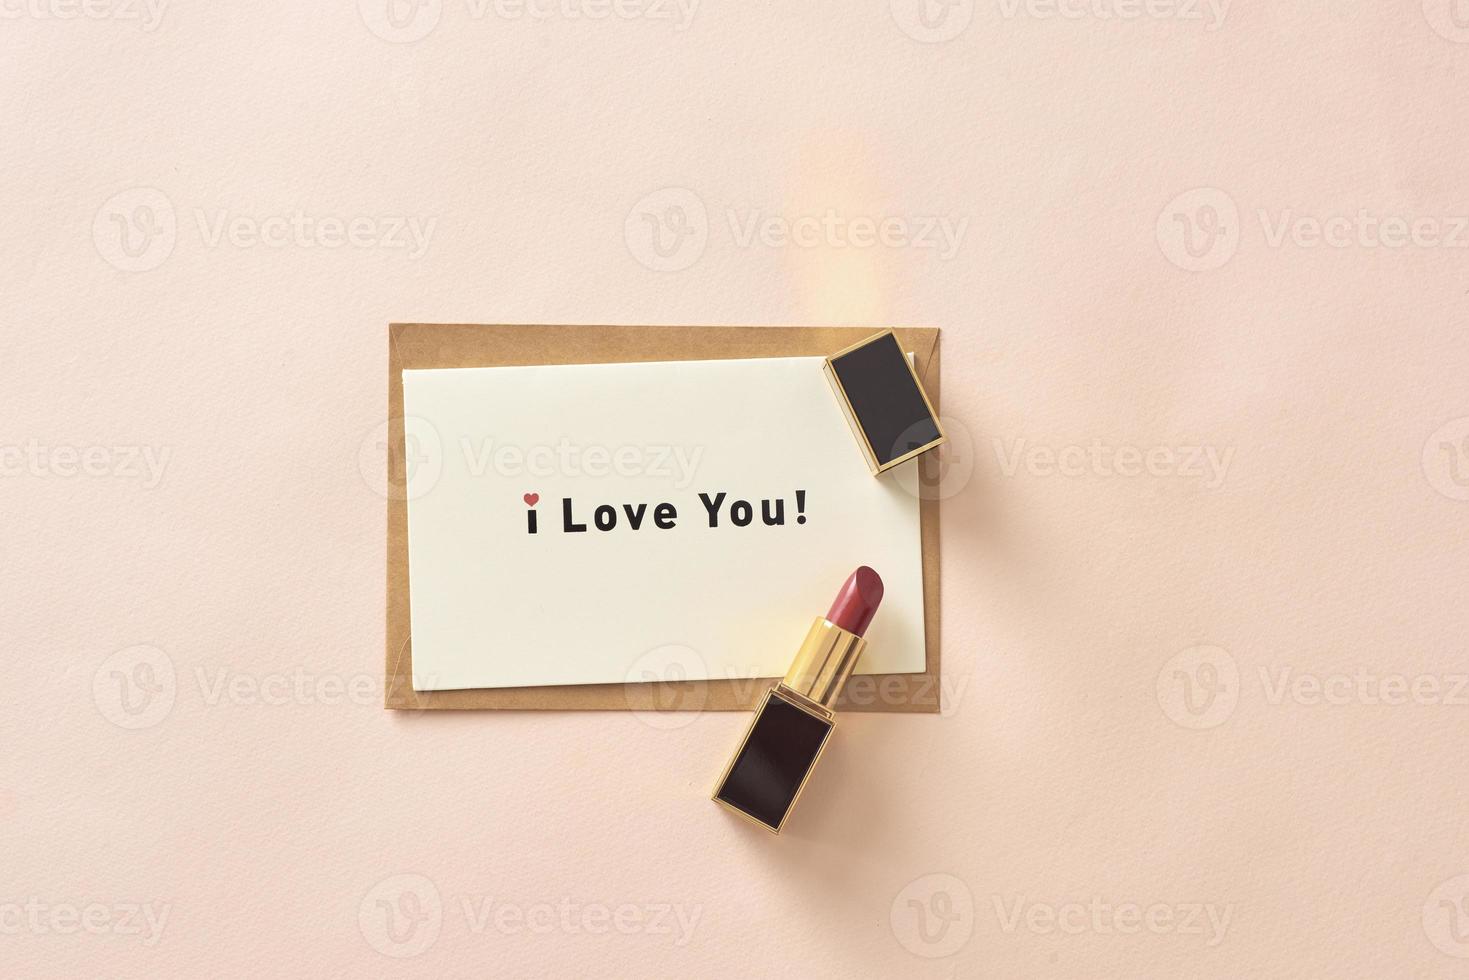 Love valentine together happy affection concept with lipstick photo